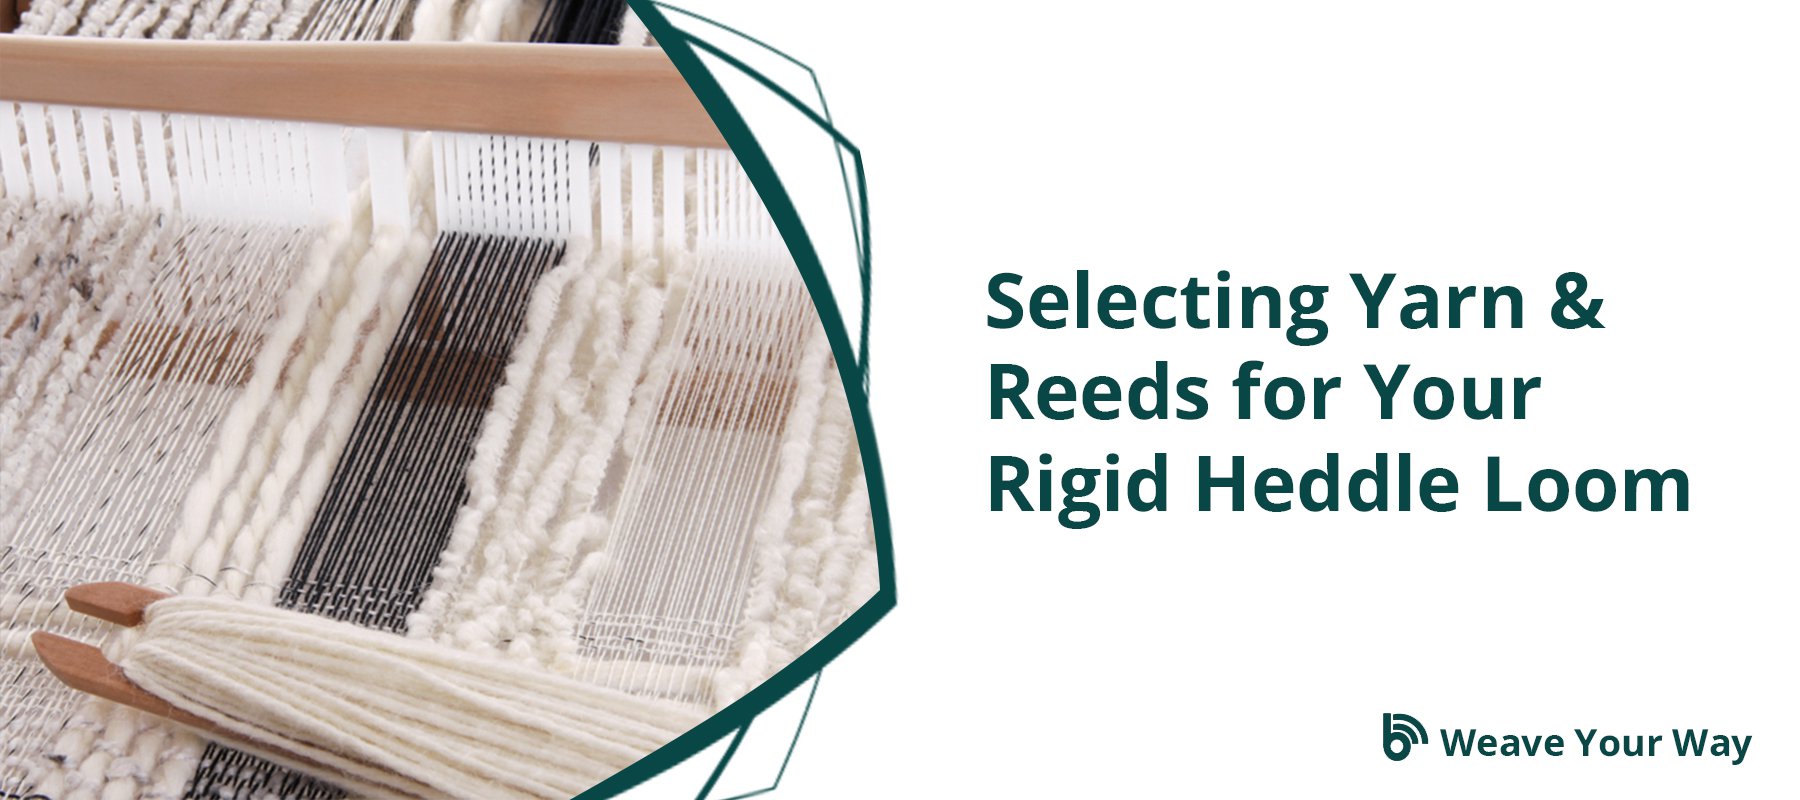 Selecting Yarn and Reeds for Your Rigid Heddle Loom